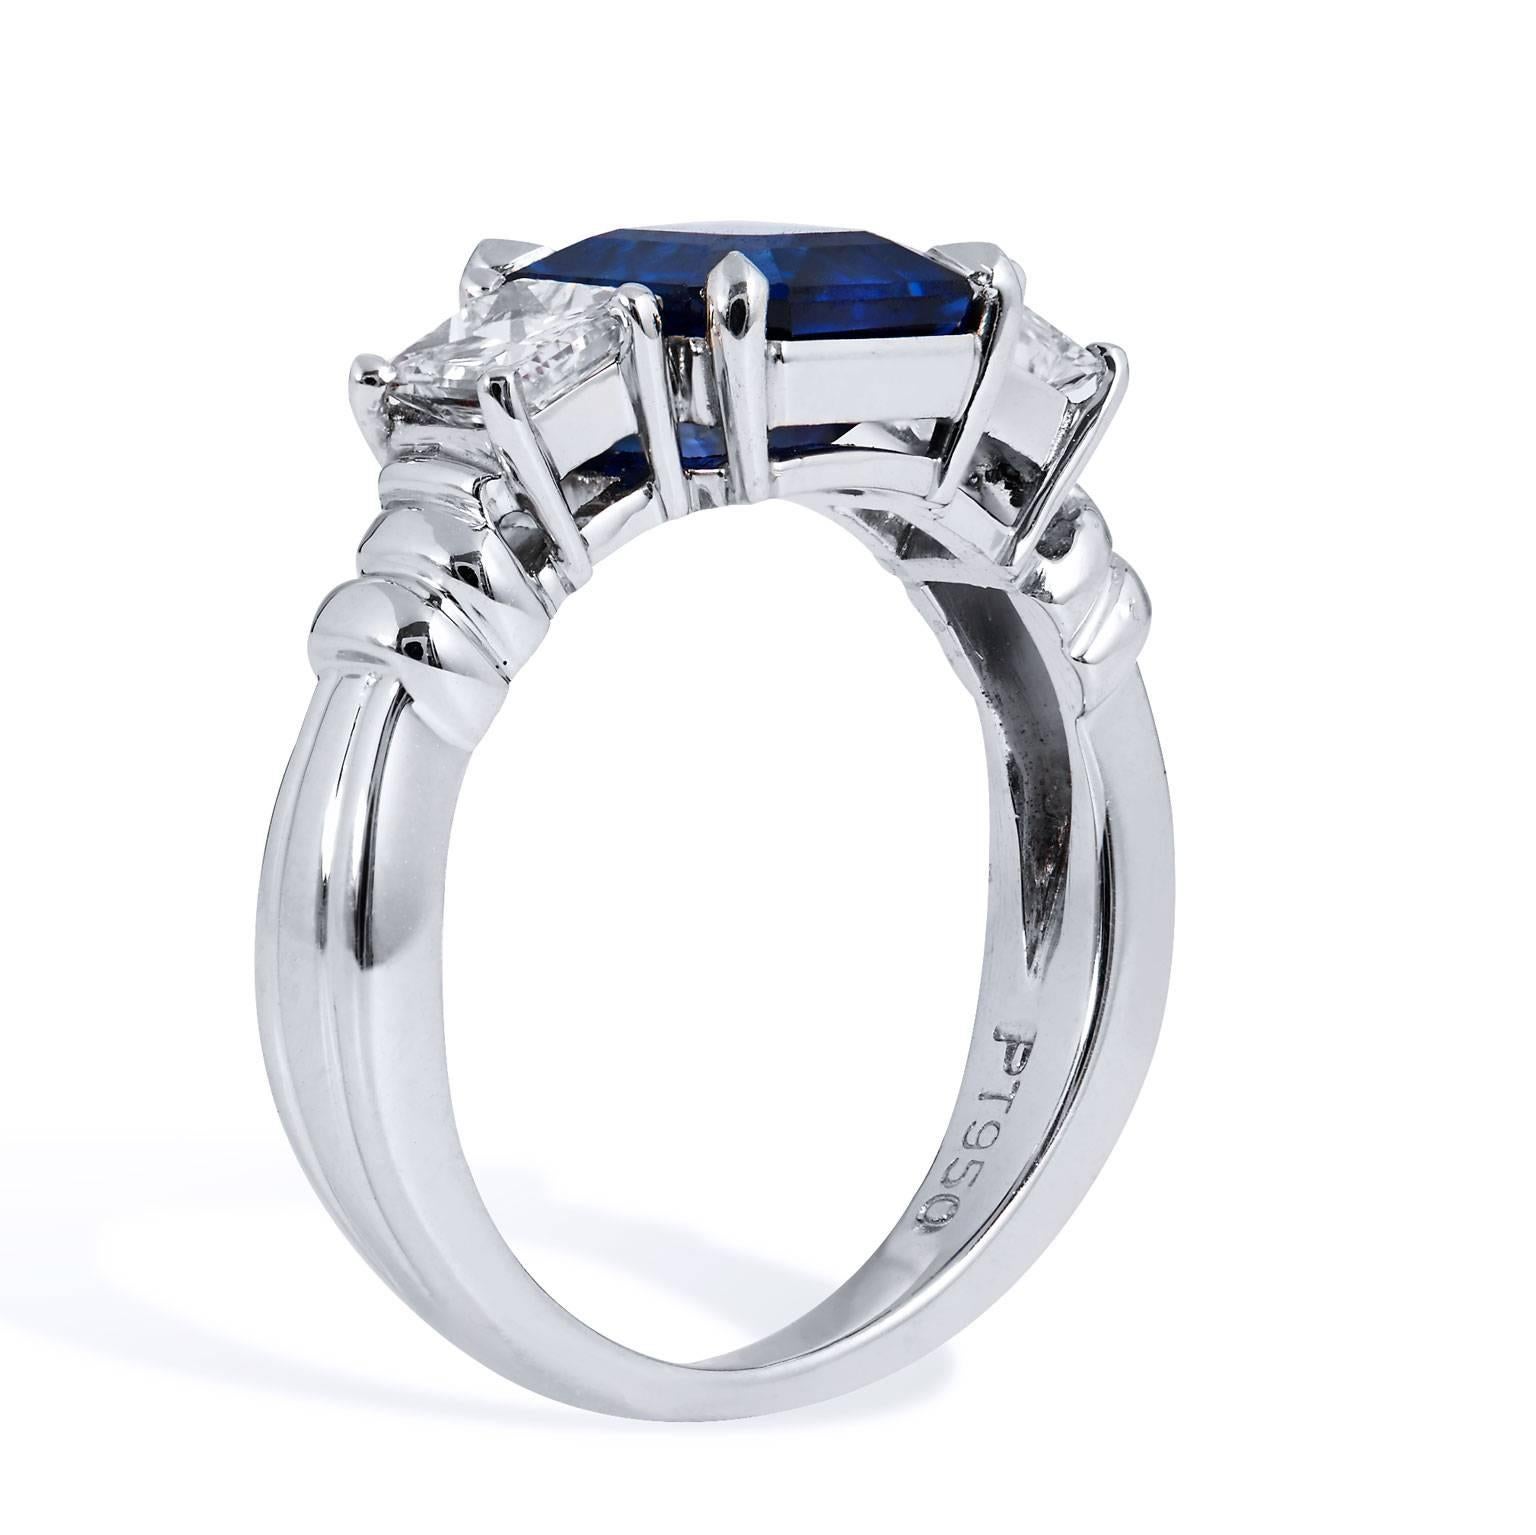 An embellished yet minimal design, this spectacular platinum ring features a 2.57 carat emerald cut blue sapphire (GIA #6173349880) affixed at center while 0.78 carat of diamond side stones (I/J/VS) enhance the four-prong blue sapphire- sweet and